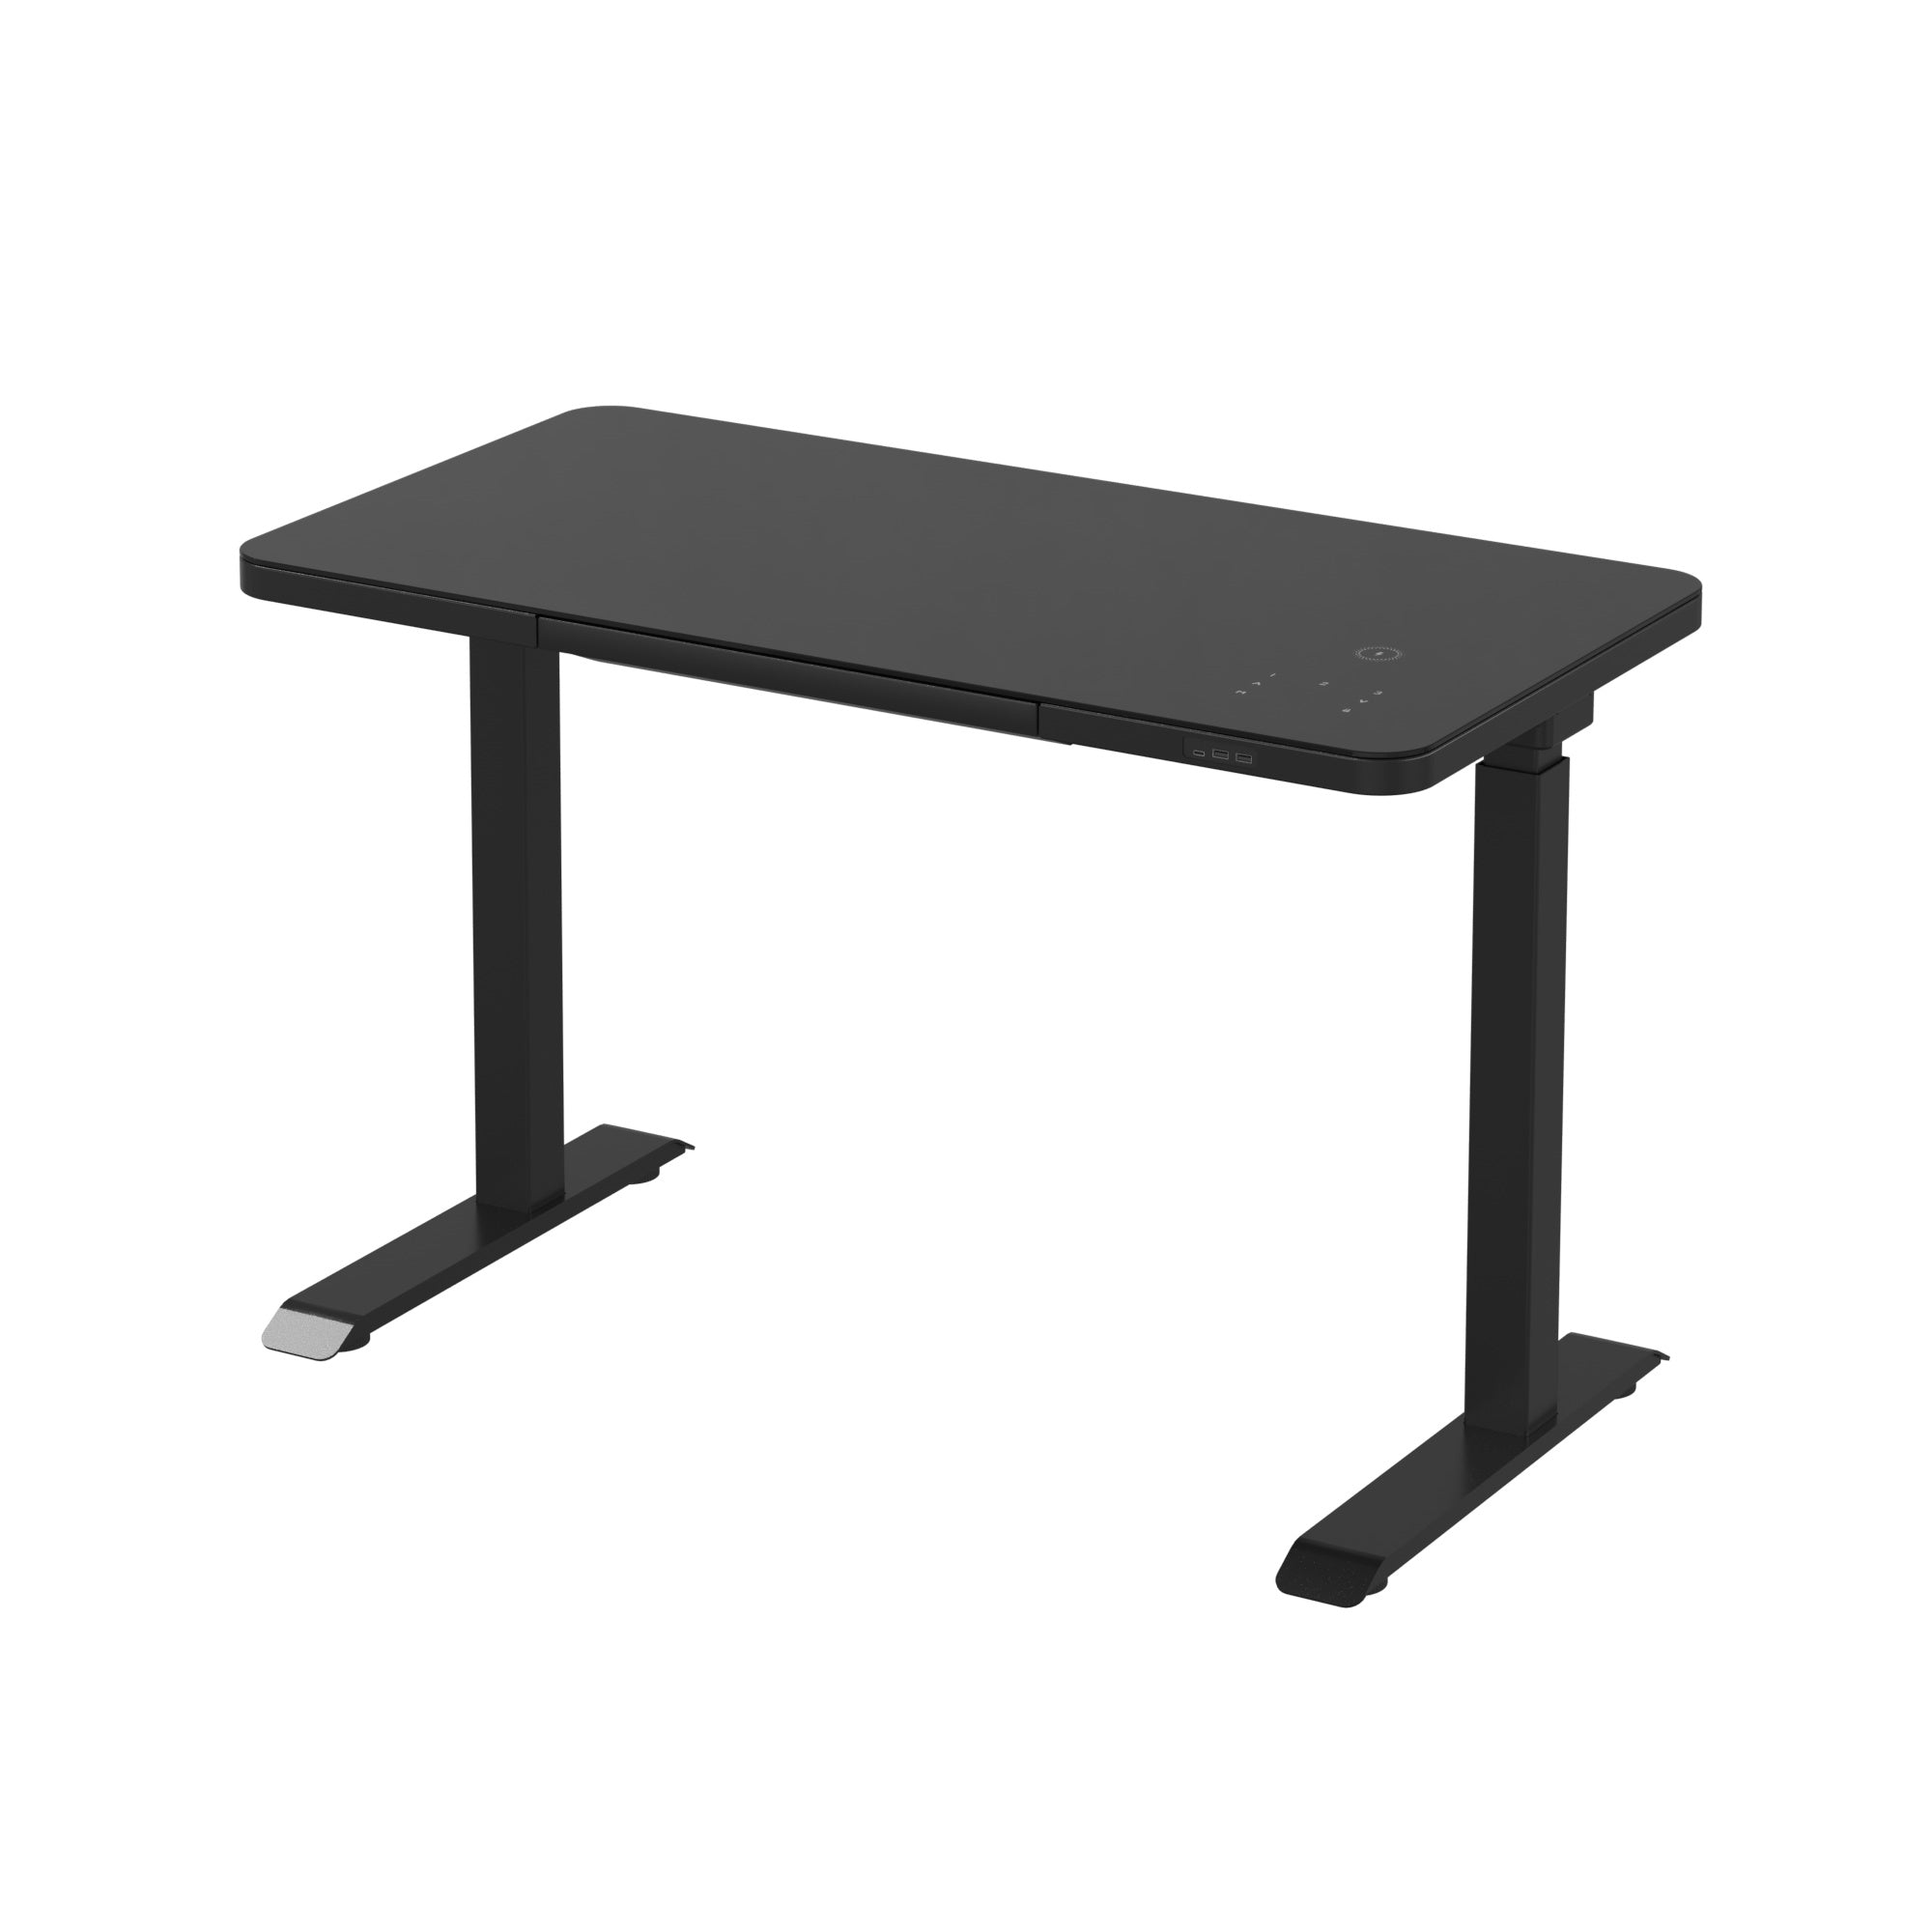 UltraFlex Black Smart Electric Height Adjustable Desk with Black Glass Top with Wireless Charging